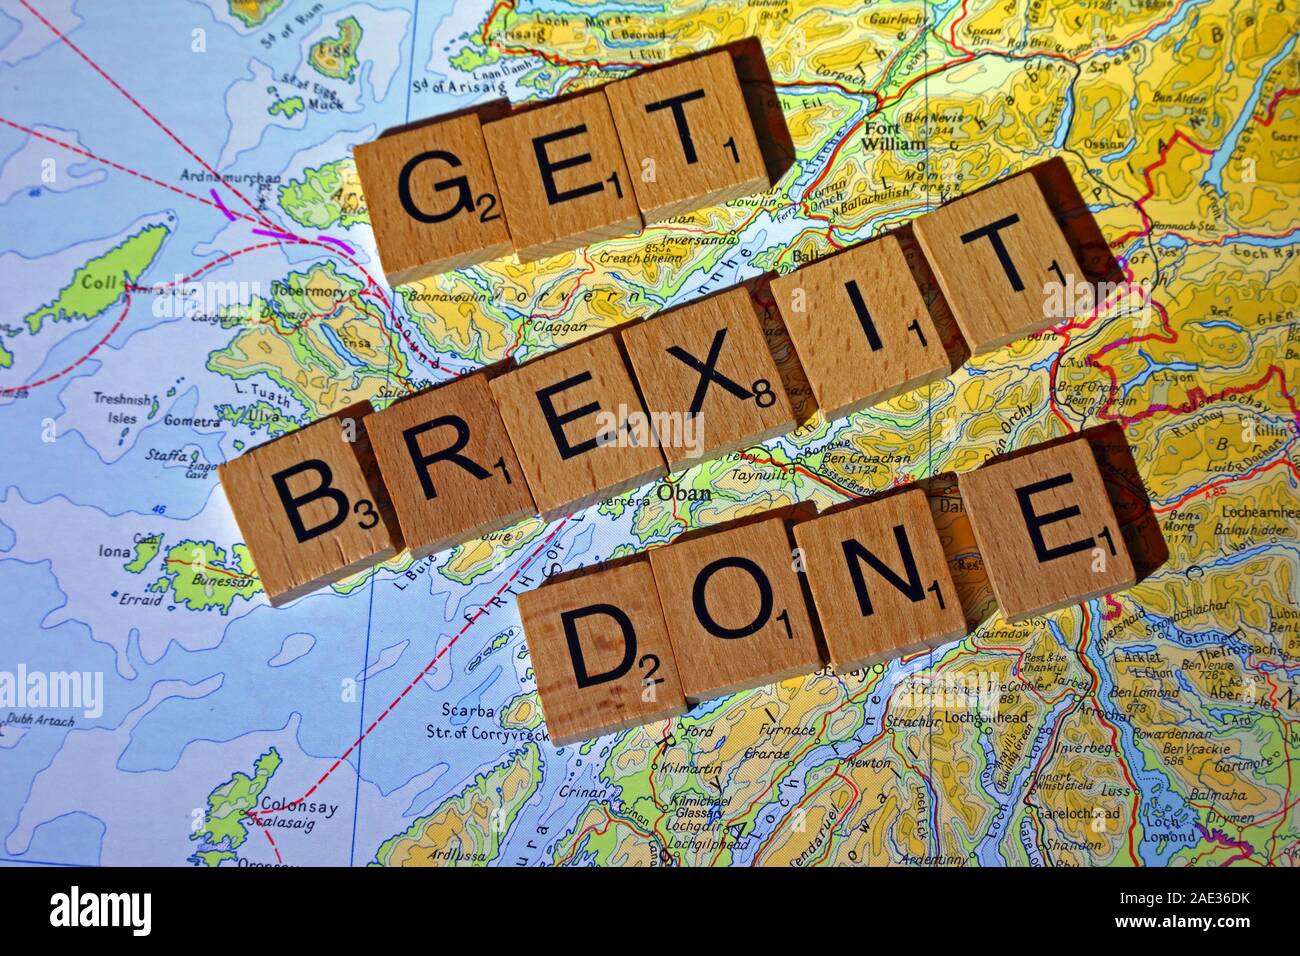 Get Brexit Done spelt in Scrabble letters on a Scottish map - General Election, elections, party political,leaders,parties,claims,doubts Stock Photo